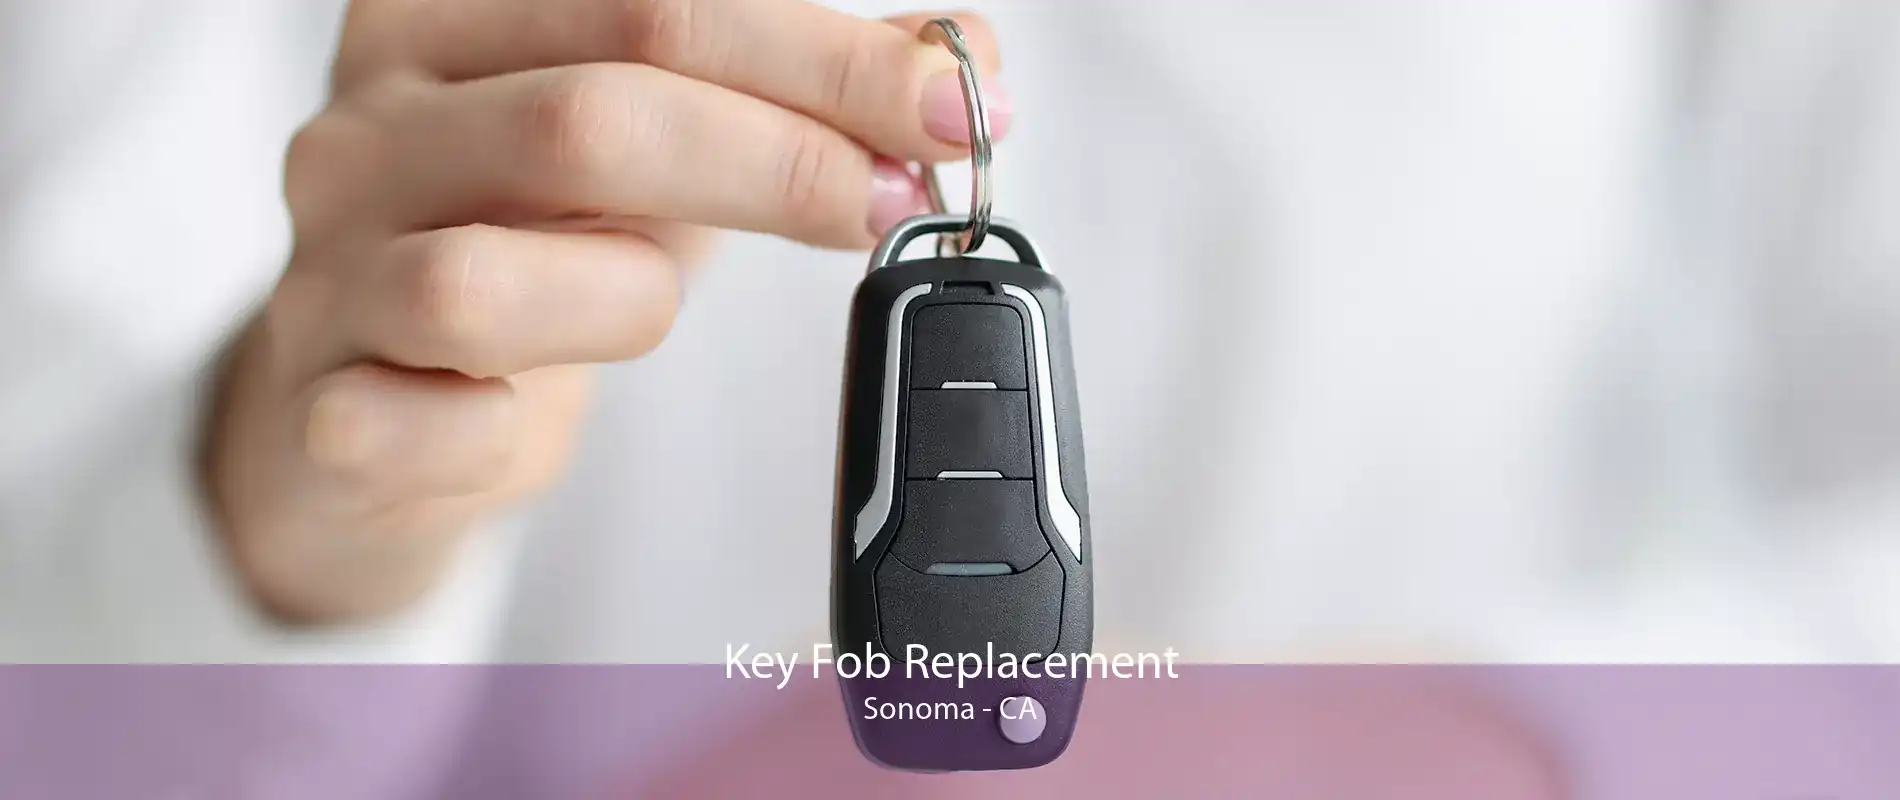 Key Fob Replacement Sonoma - CA